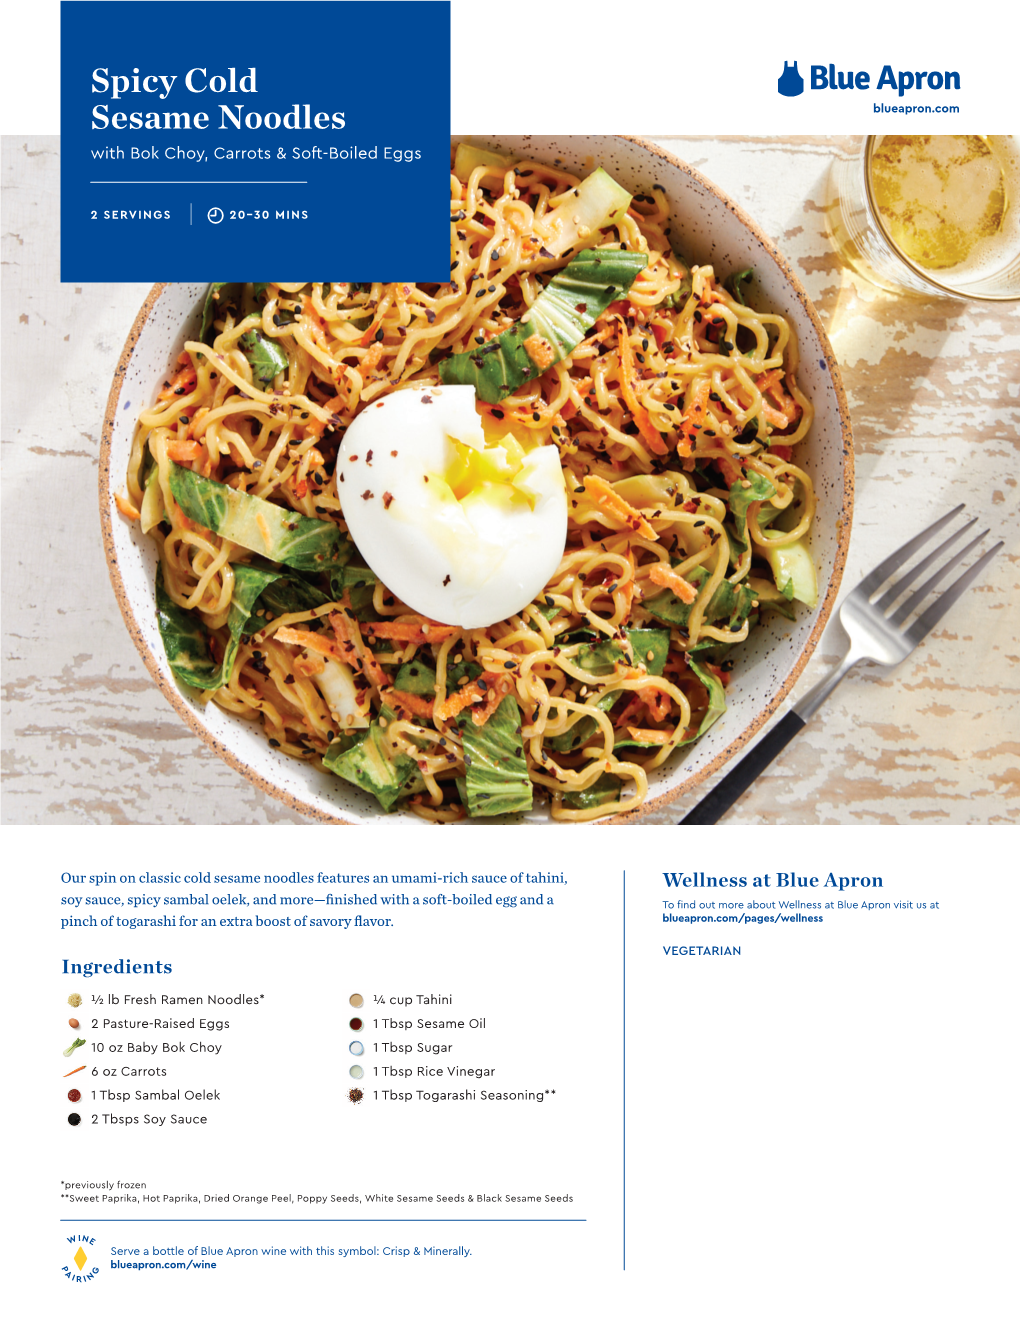 Spicy Cold Sesame Noodles Blueapron.Com with Bok Choy, Carrots & Soft-Boiled Eggs